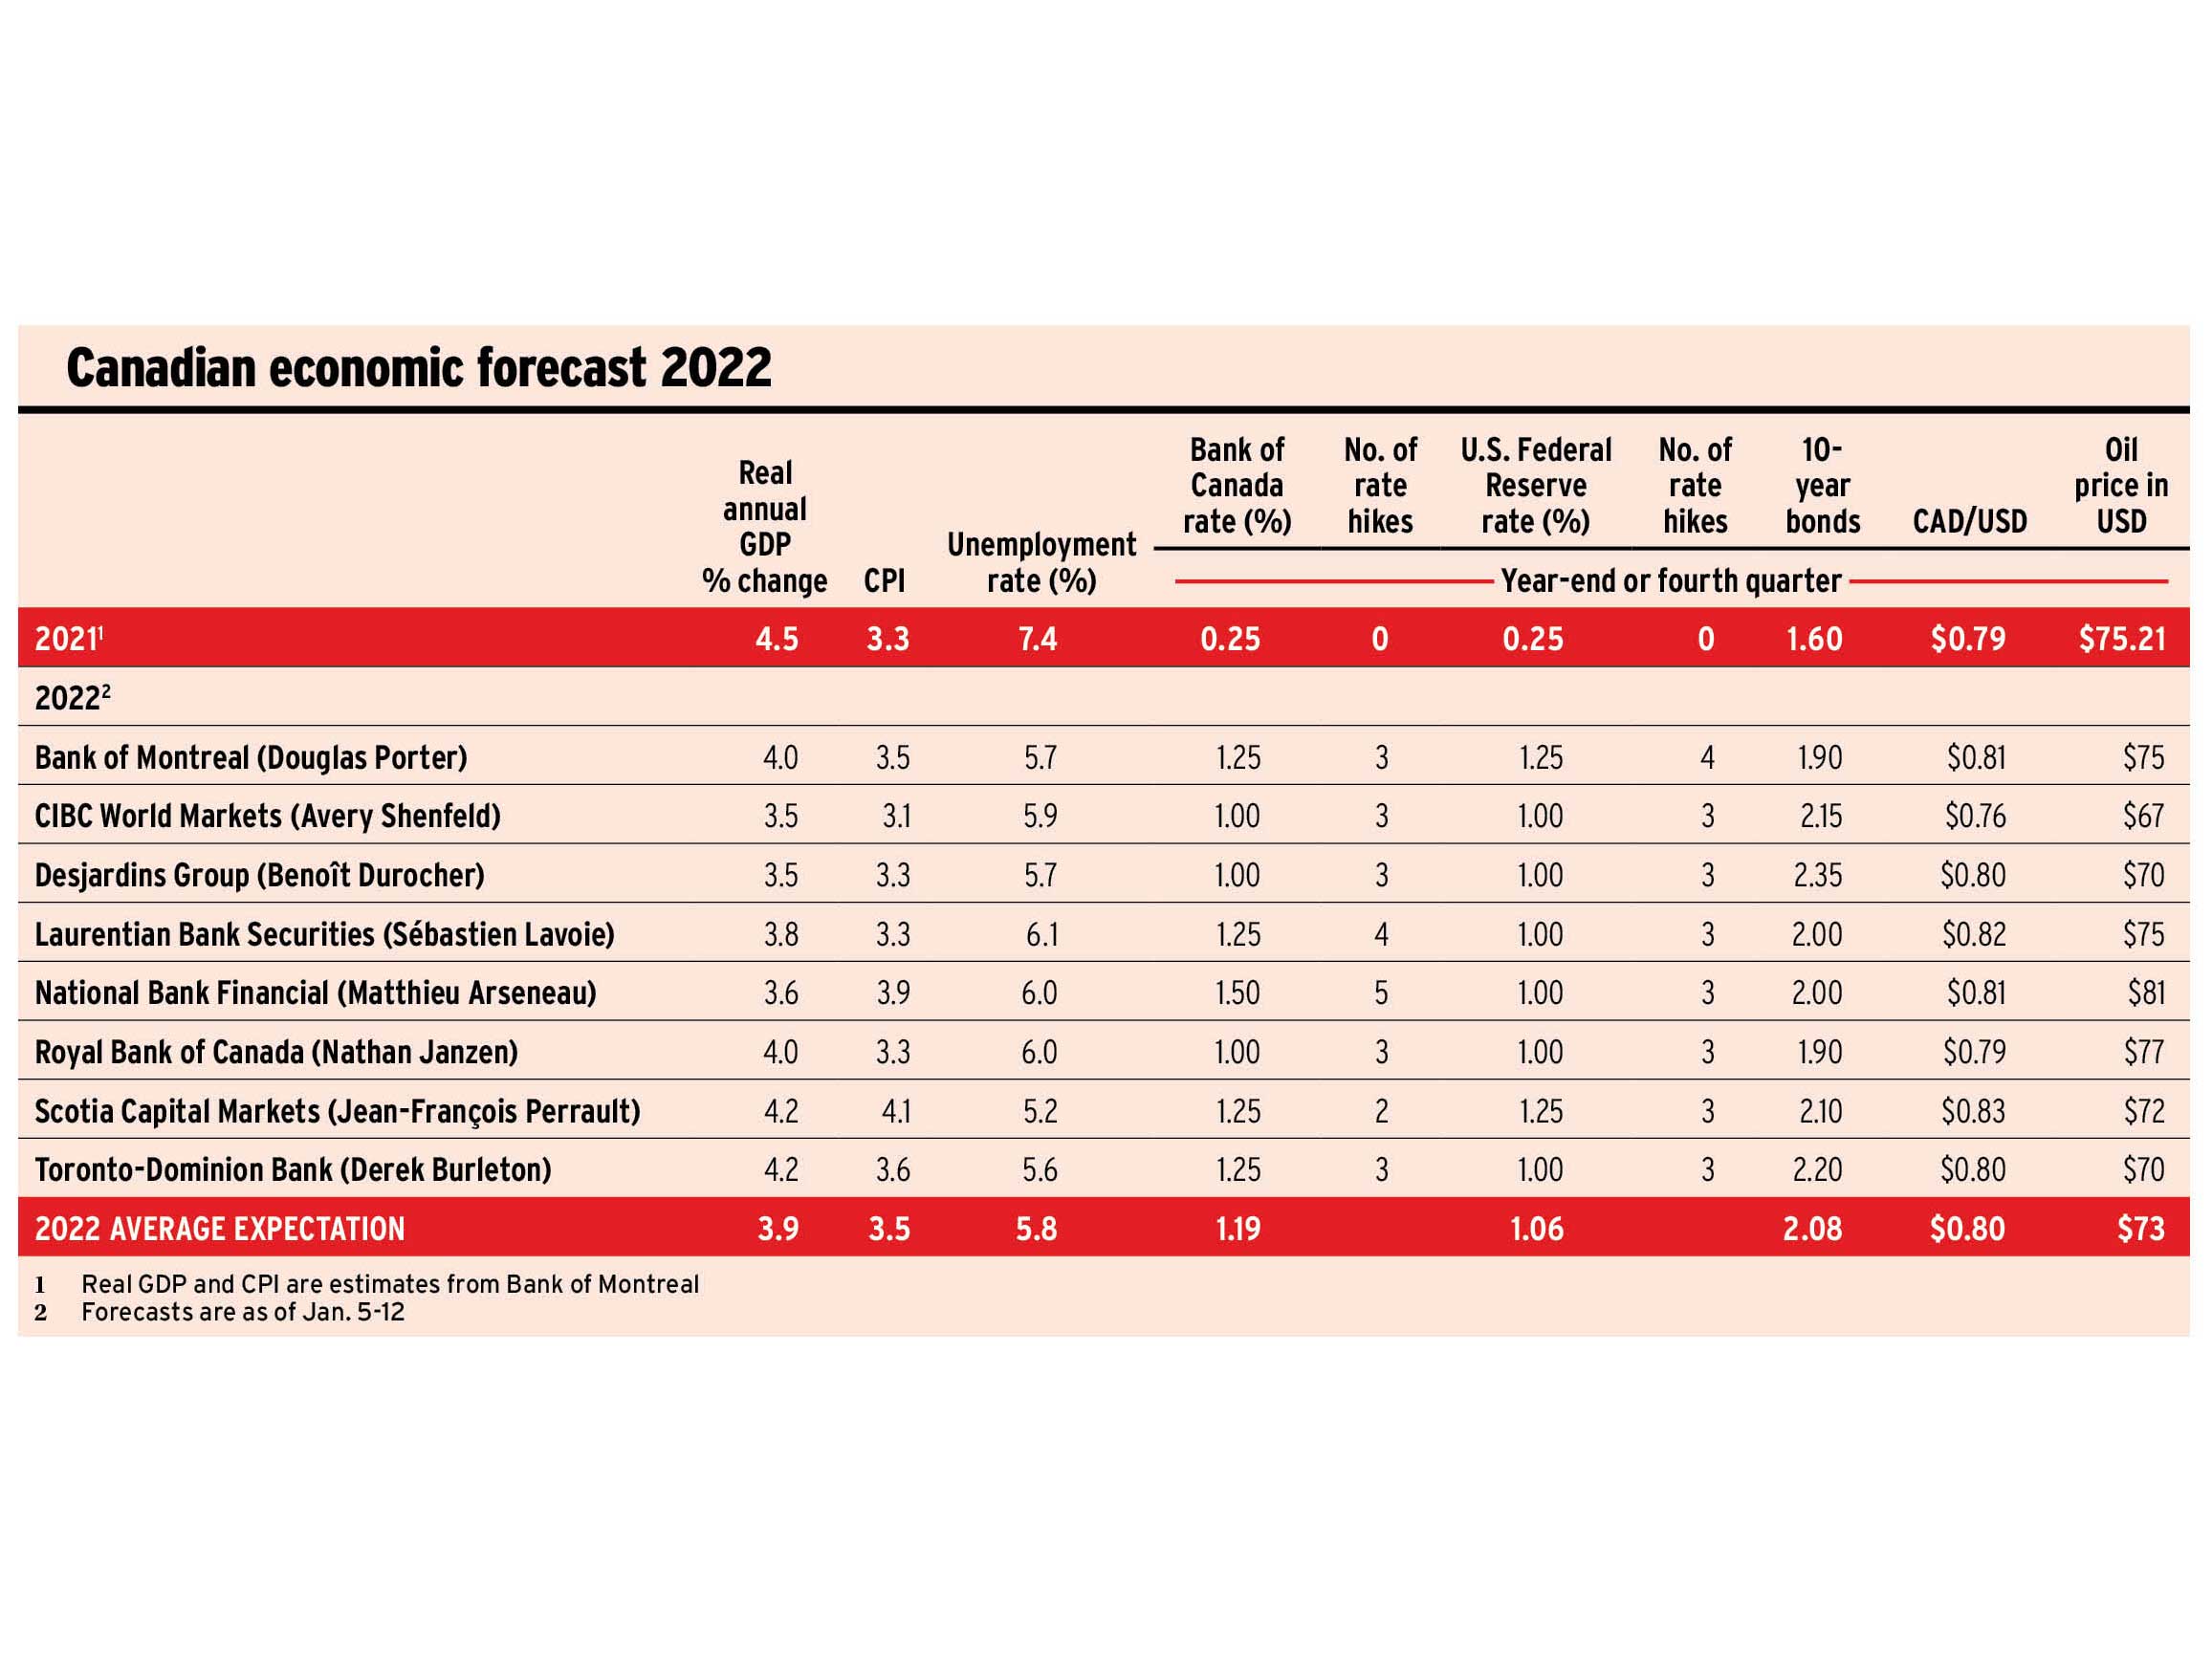 economists' forecasts for 2022